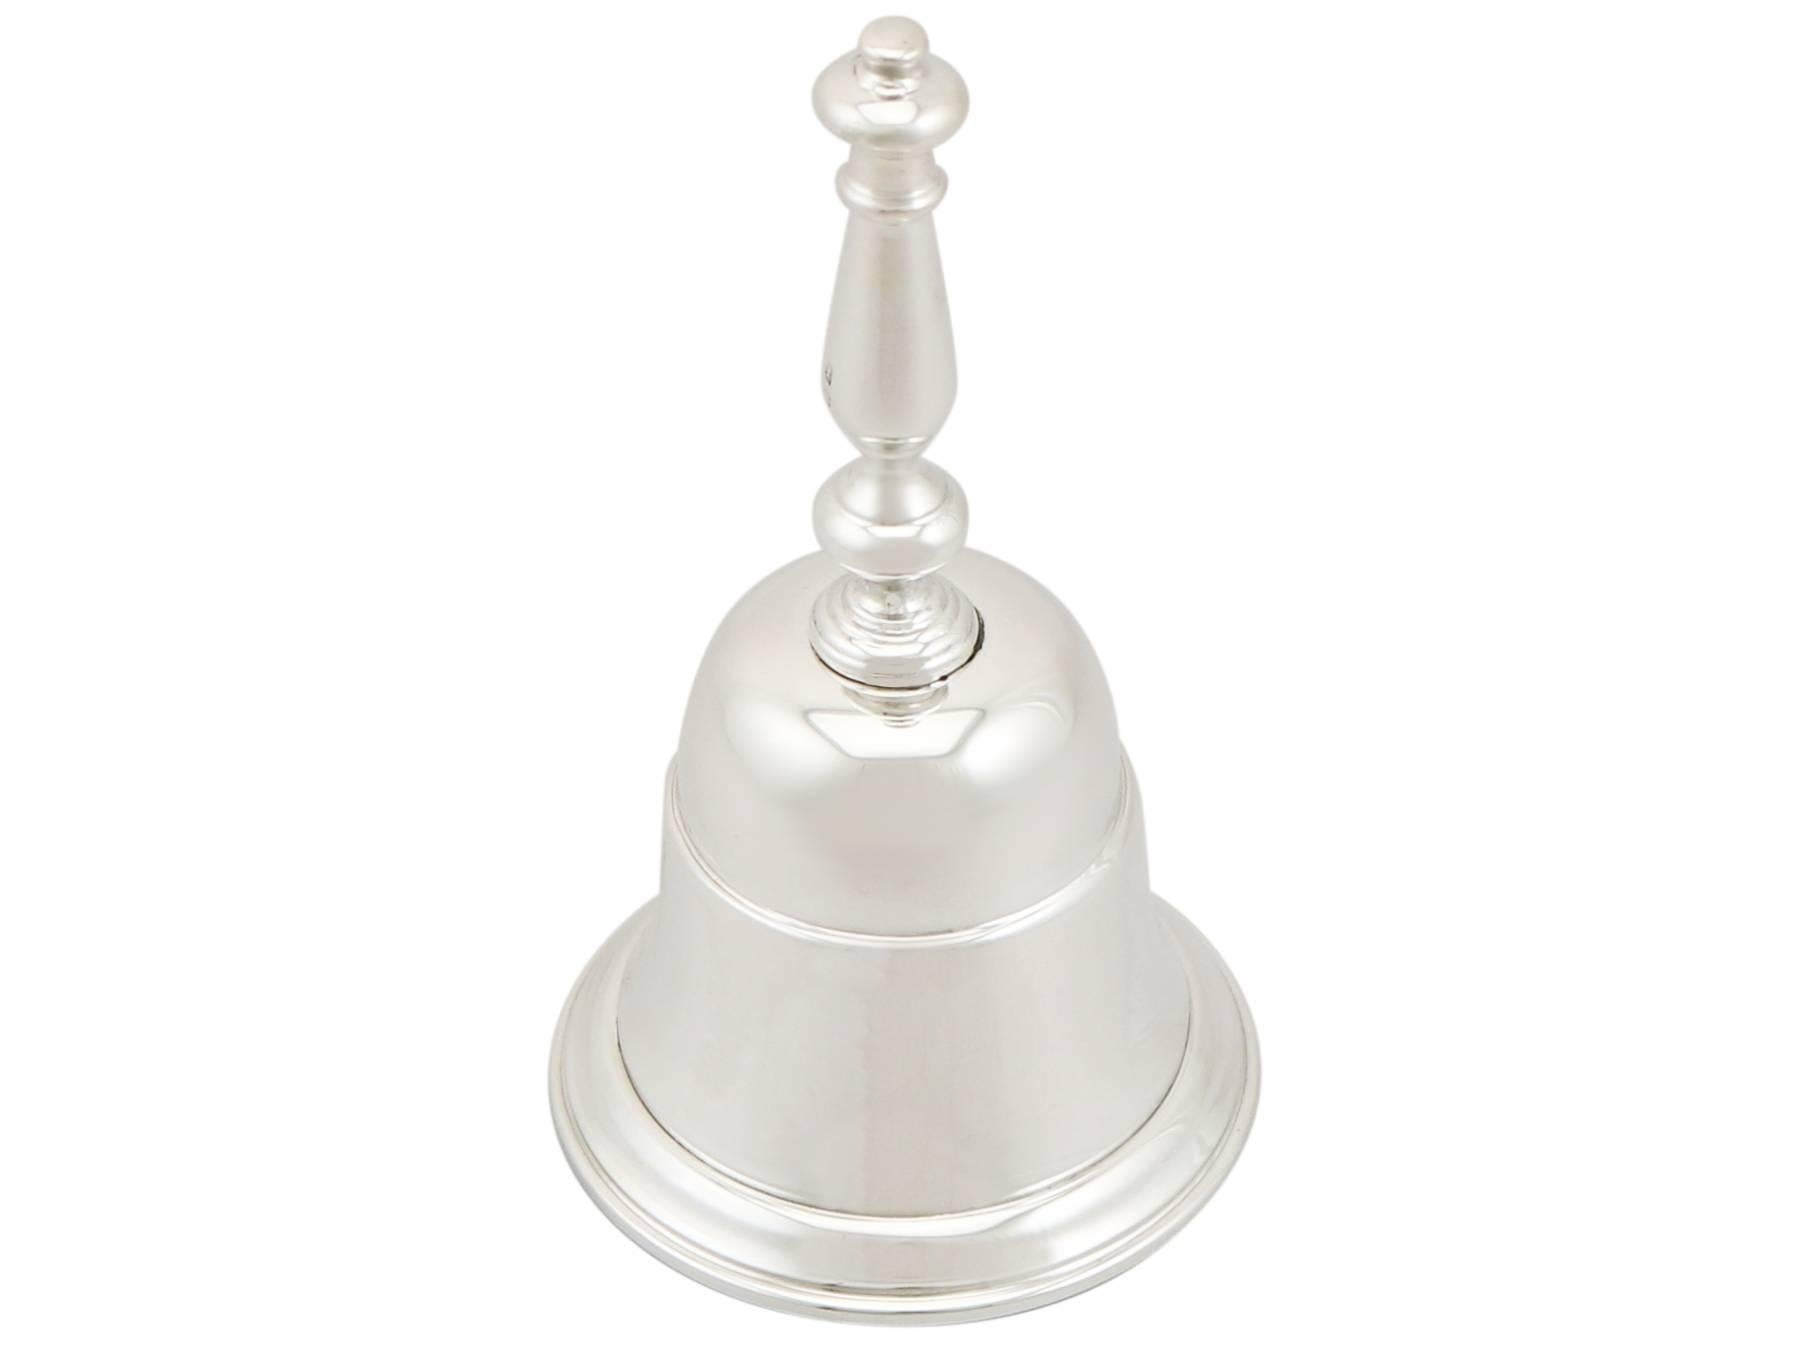 Great Britain (UK) 1970s Sterling Silver Table Bell